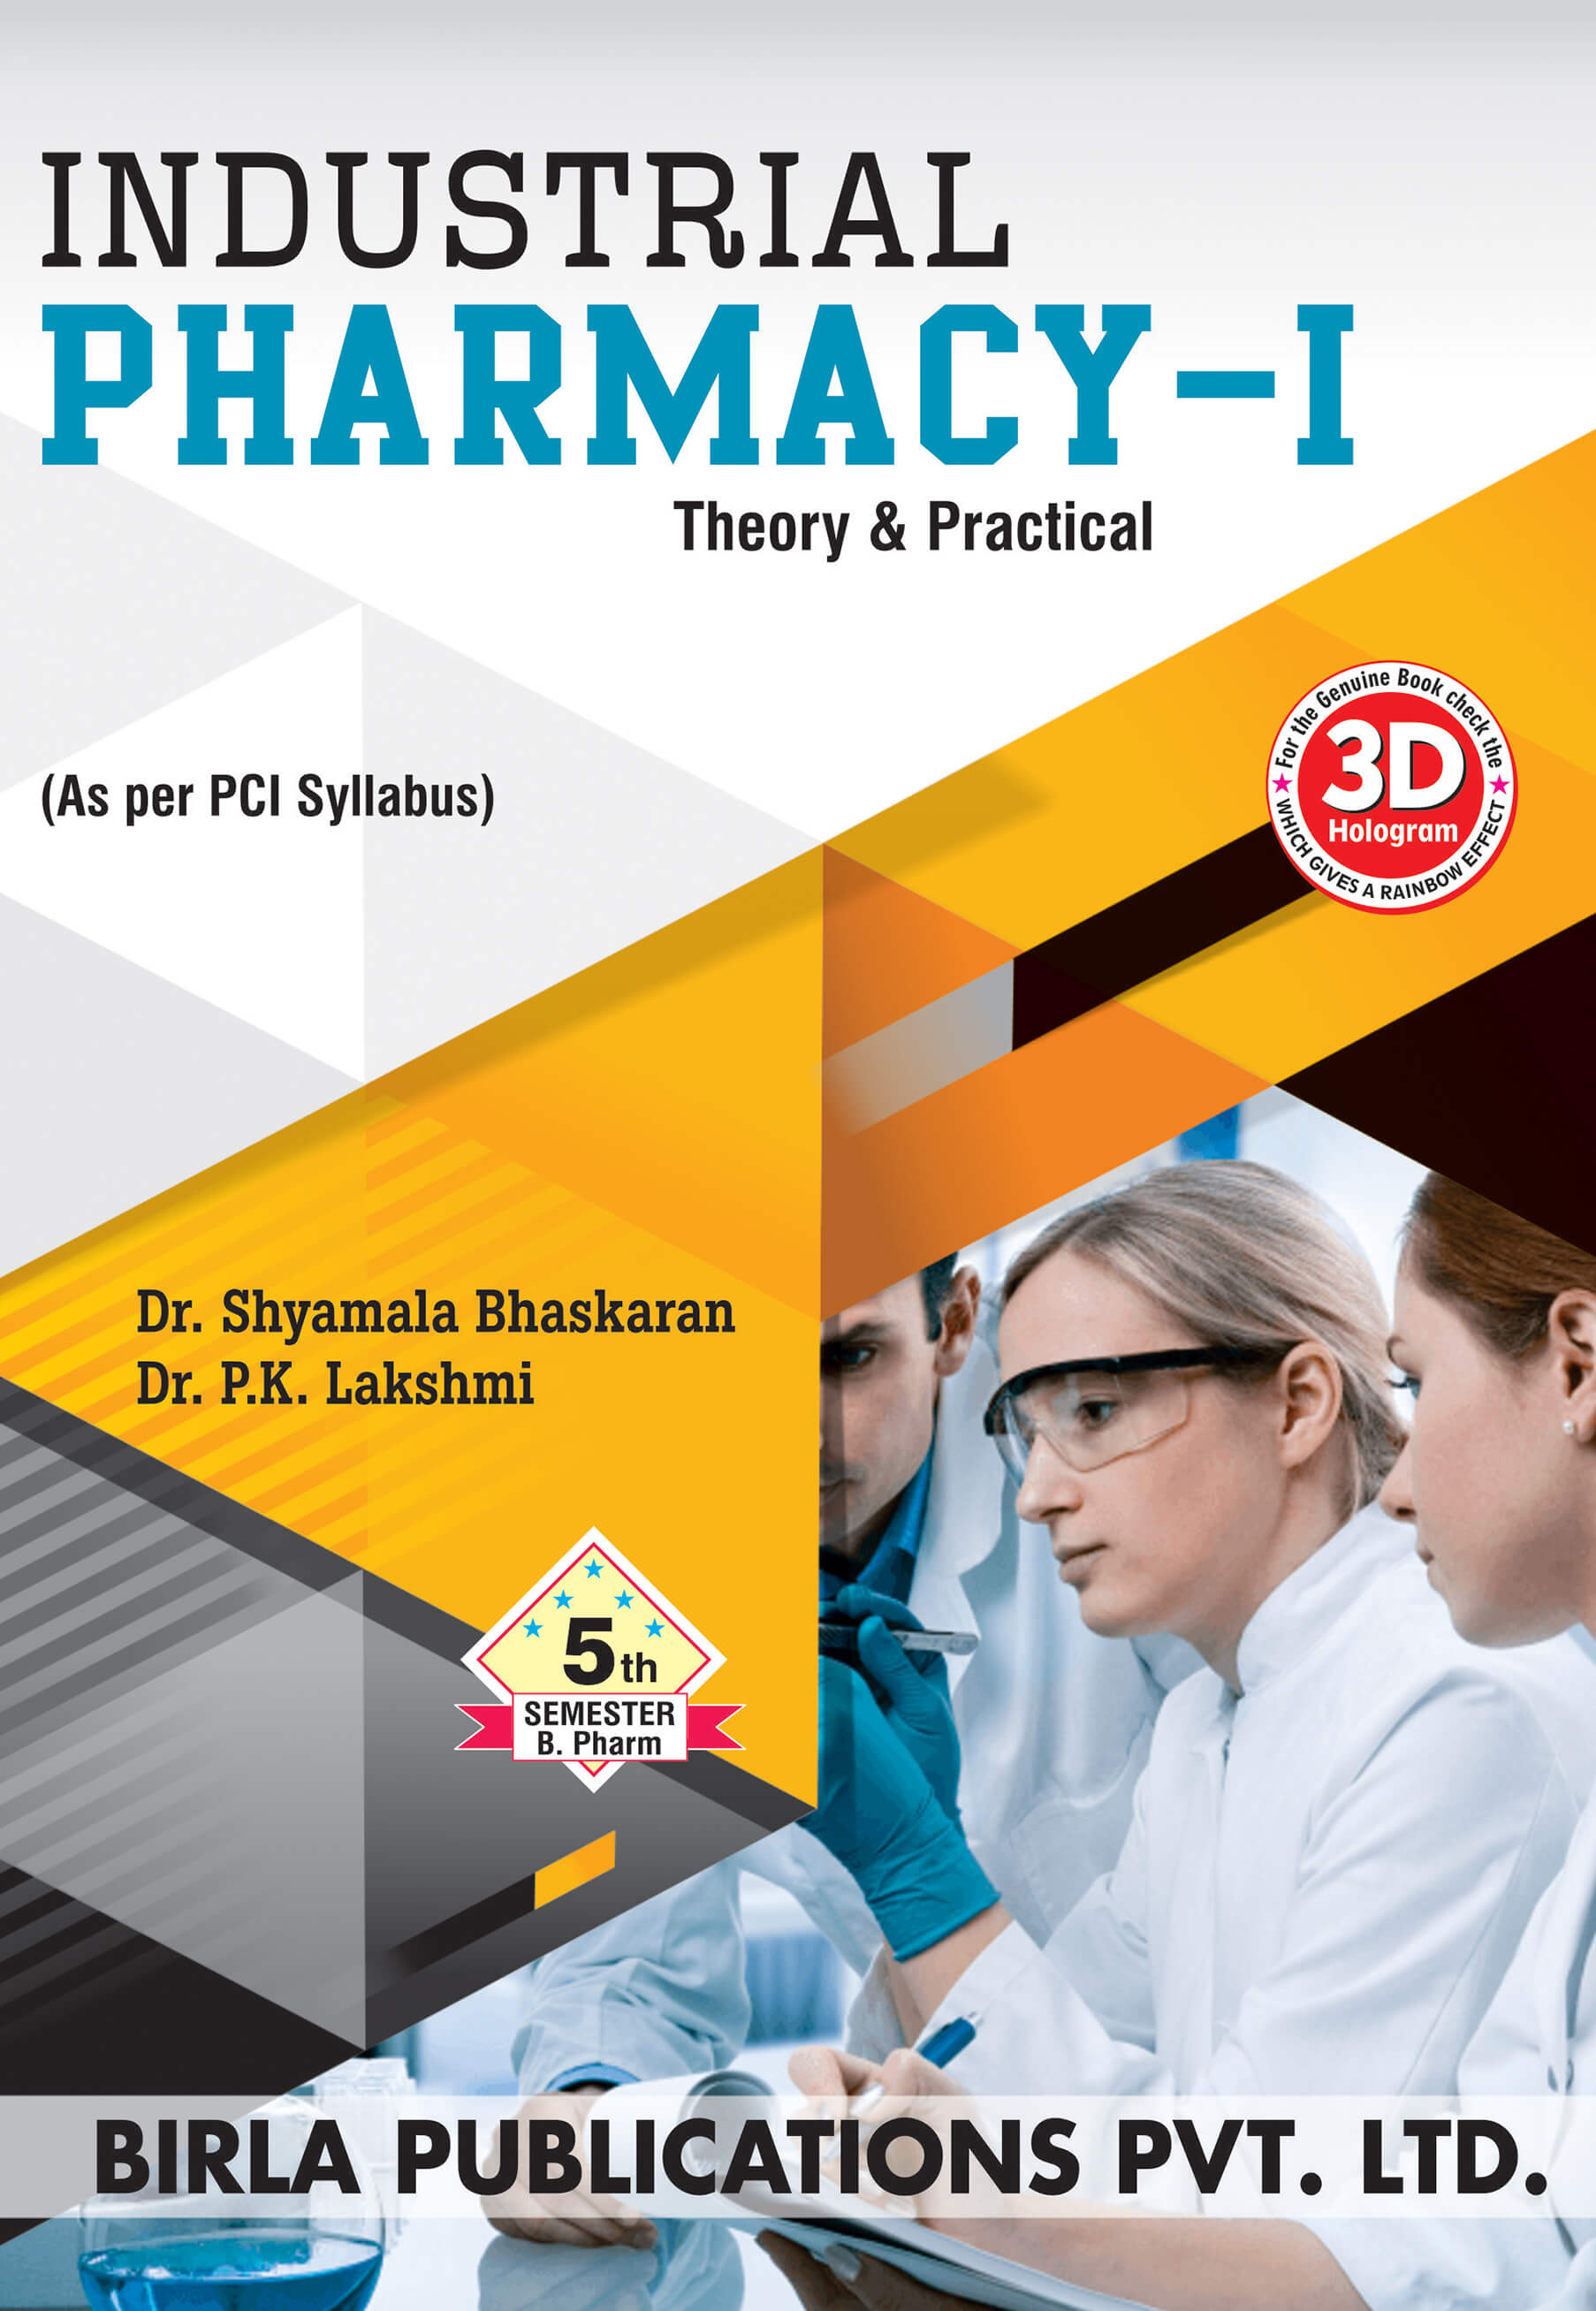 INDUSTRIAL PHARMACY-I (Theory & Practical )